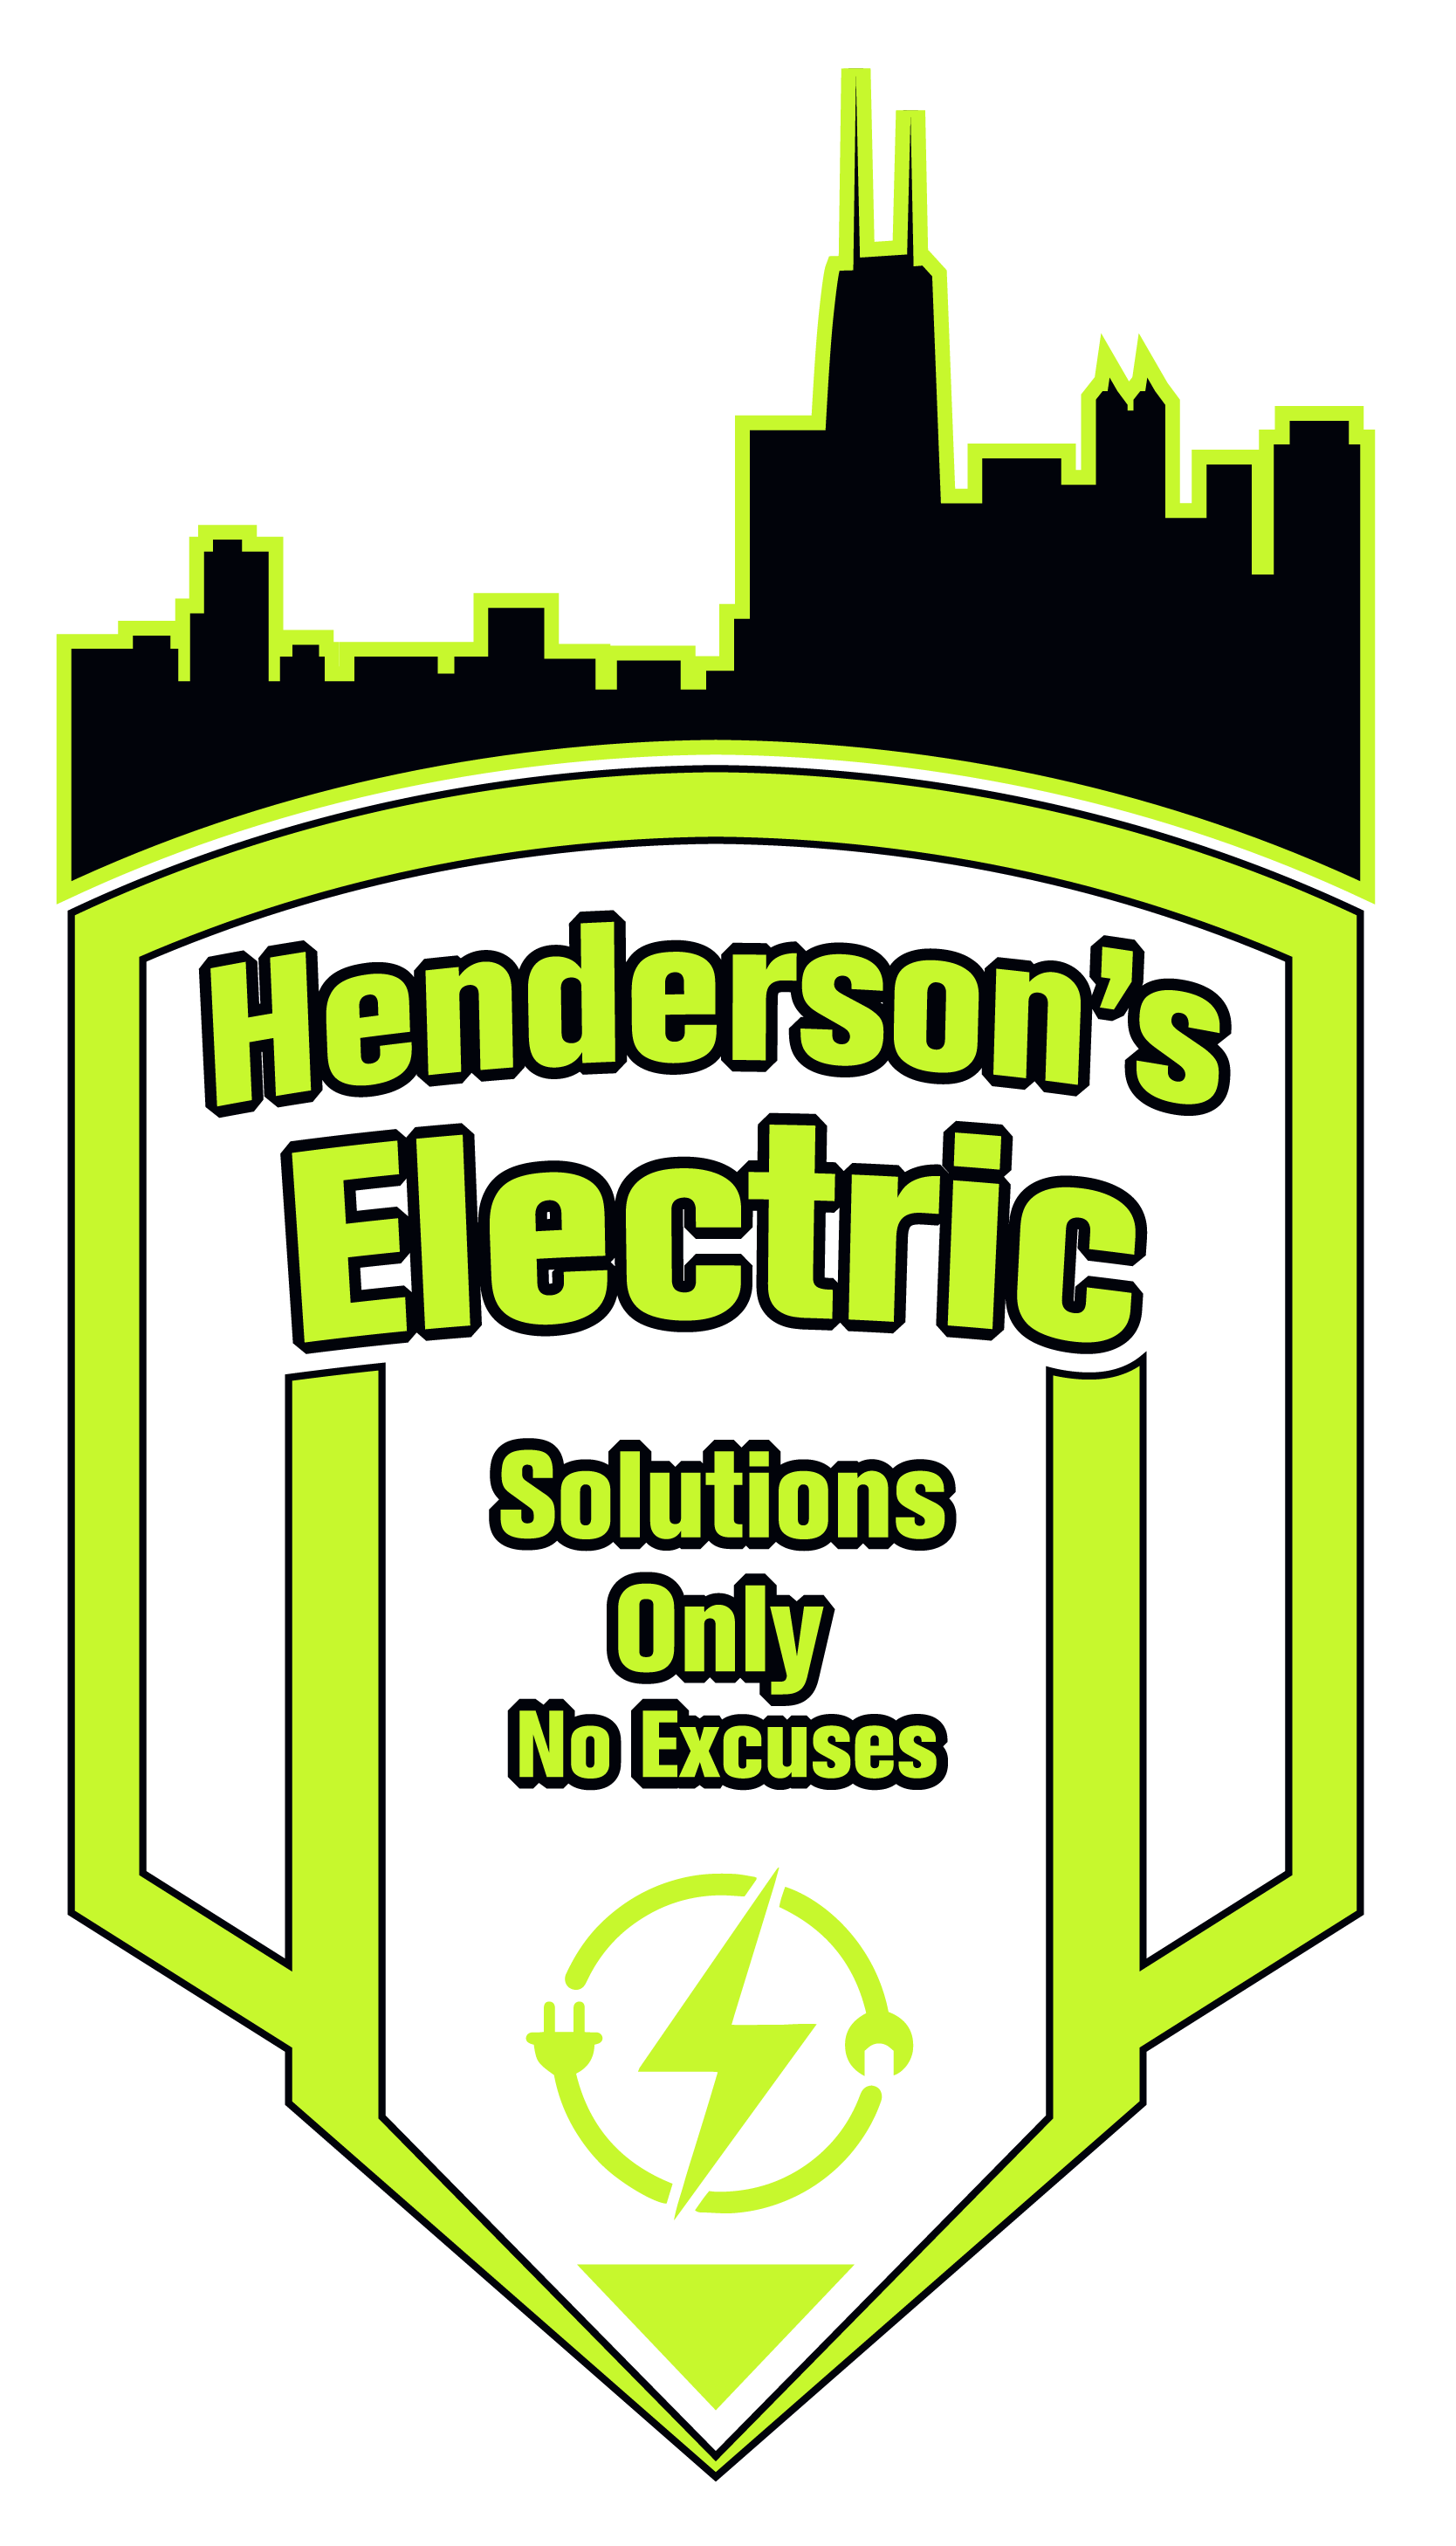 Hendersons Electric Solutions